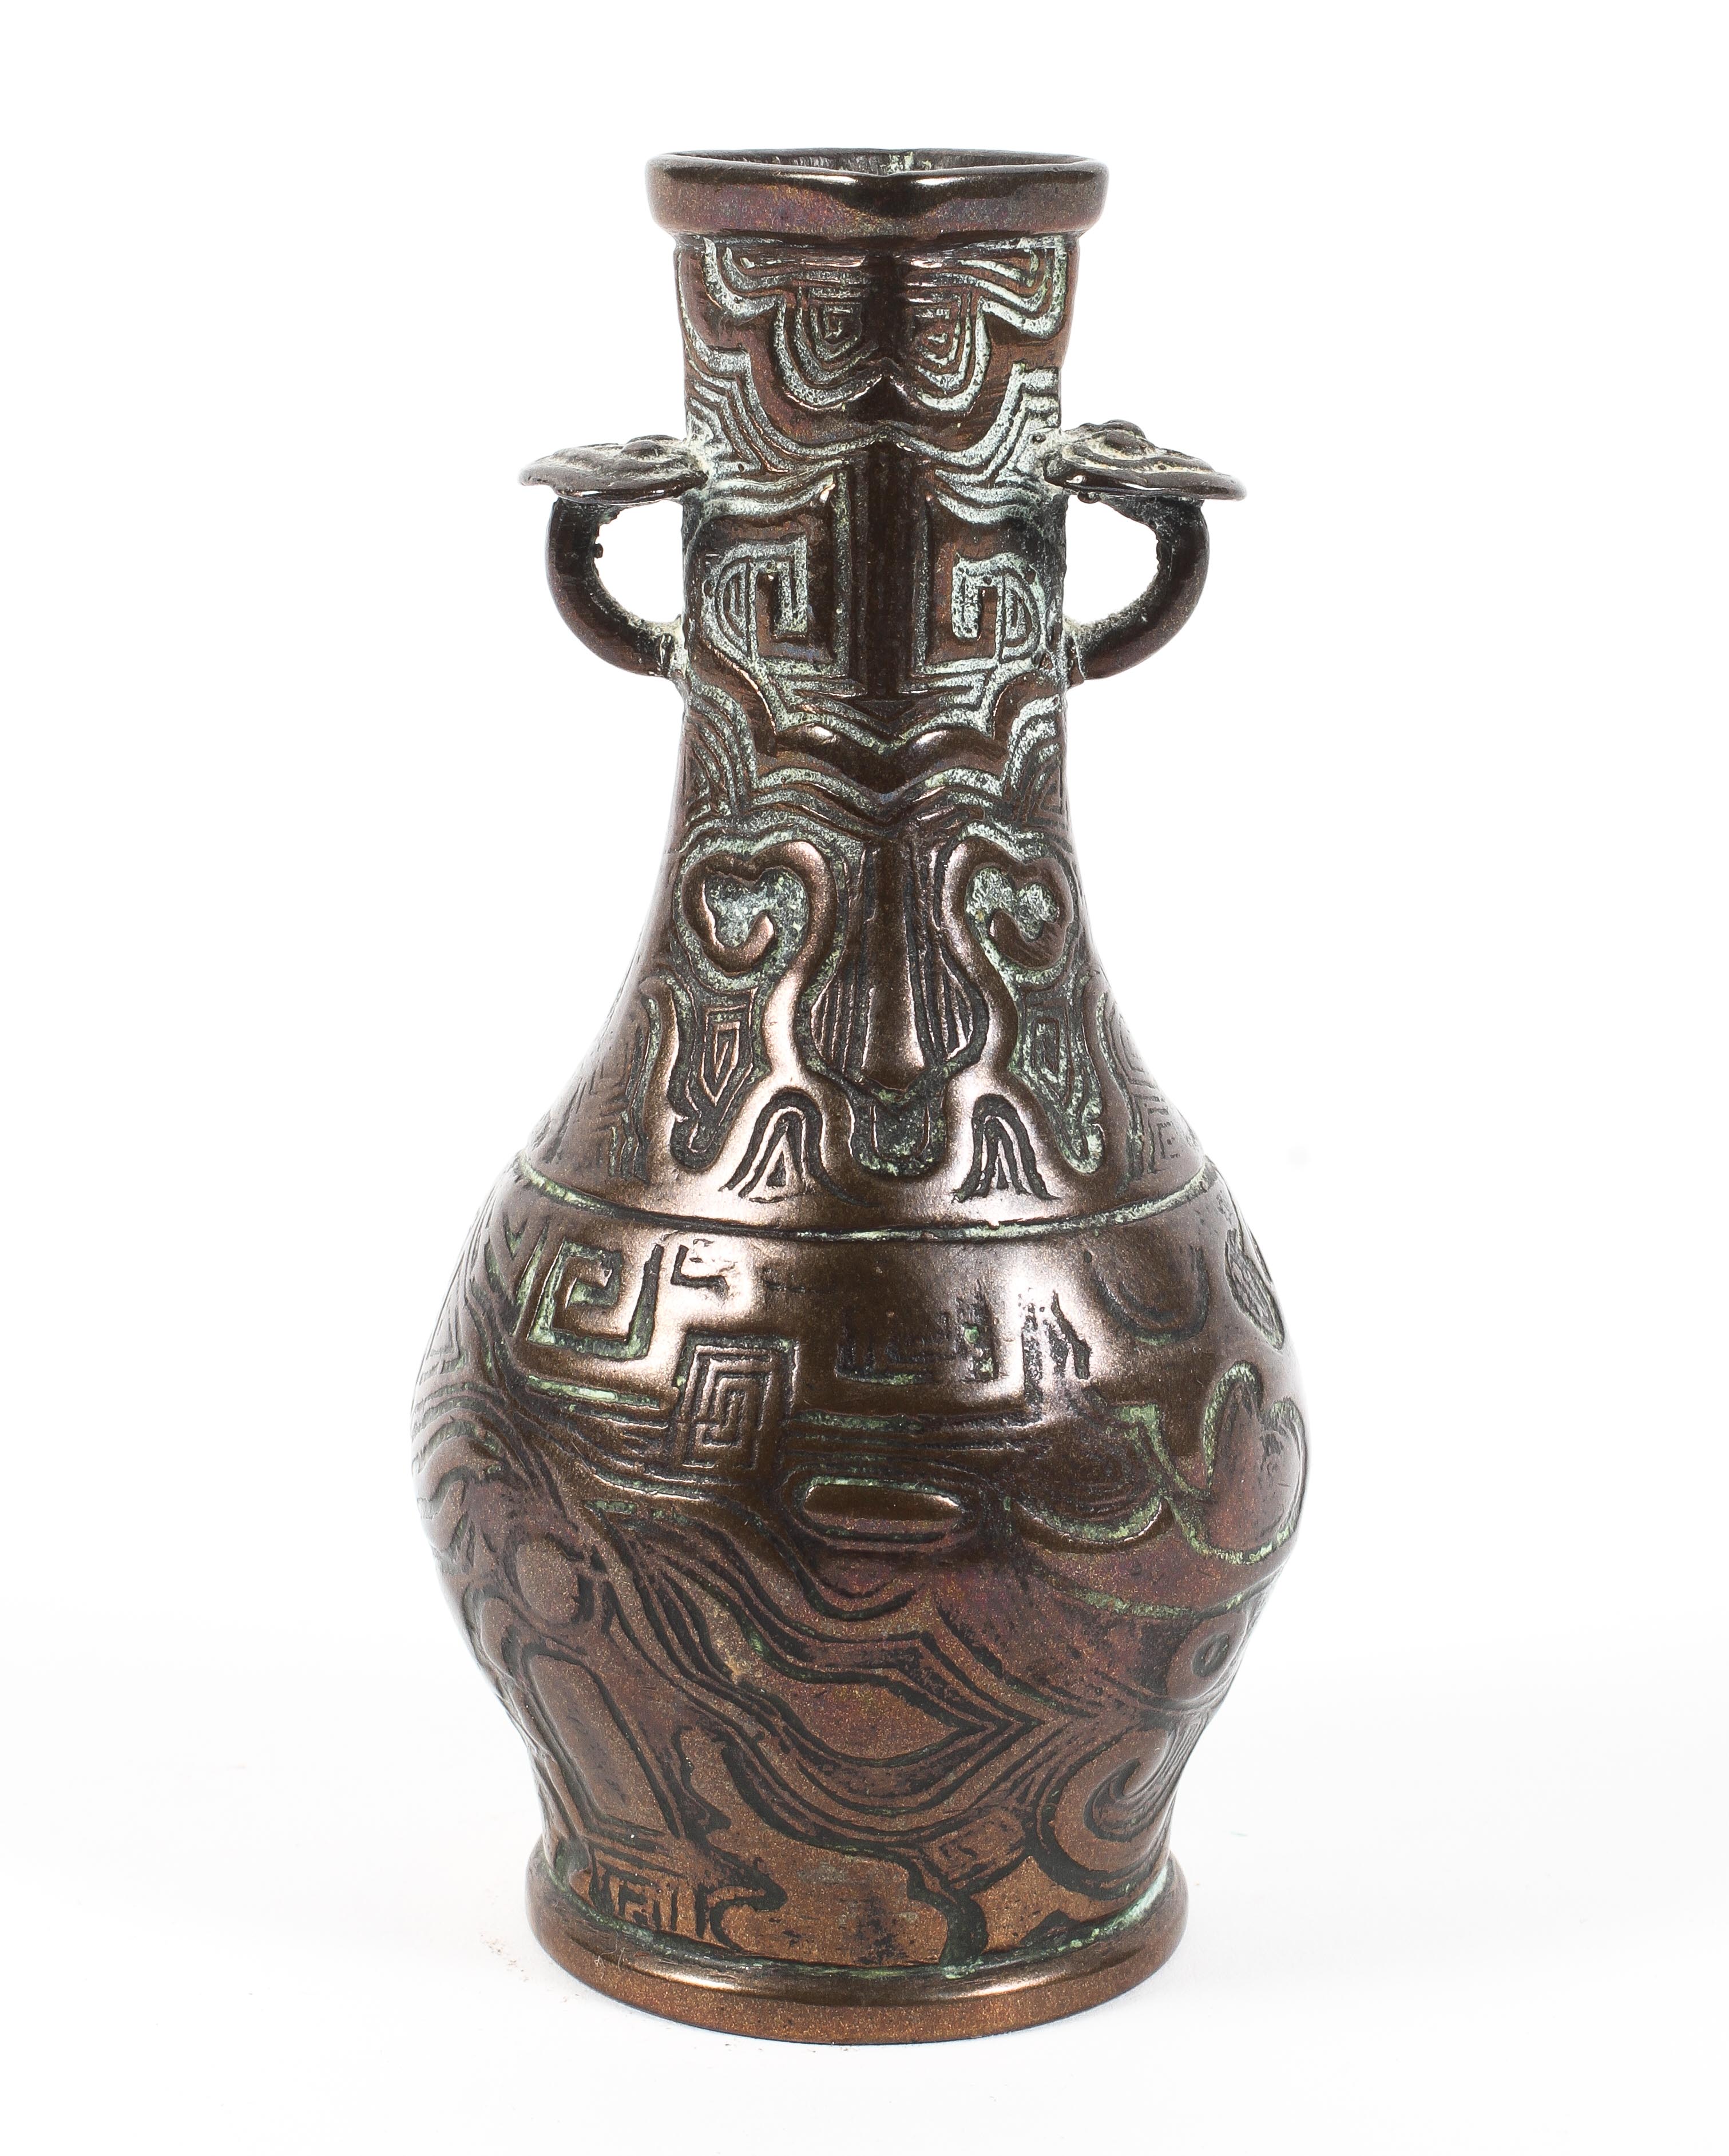 A Chinese bronze baluster vase.